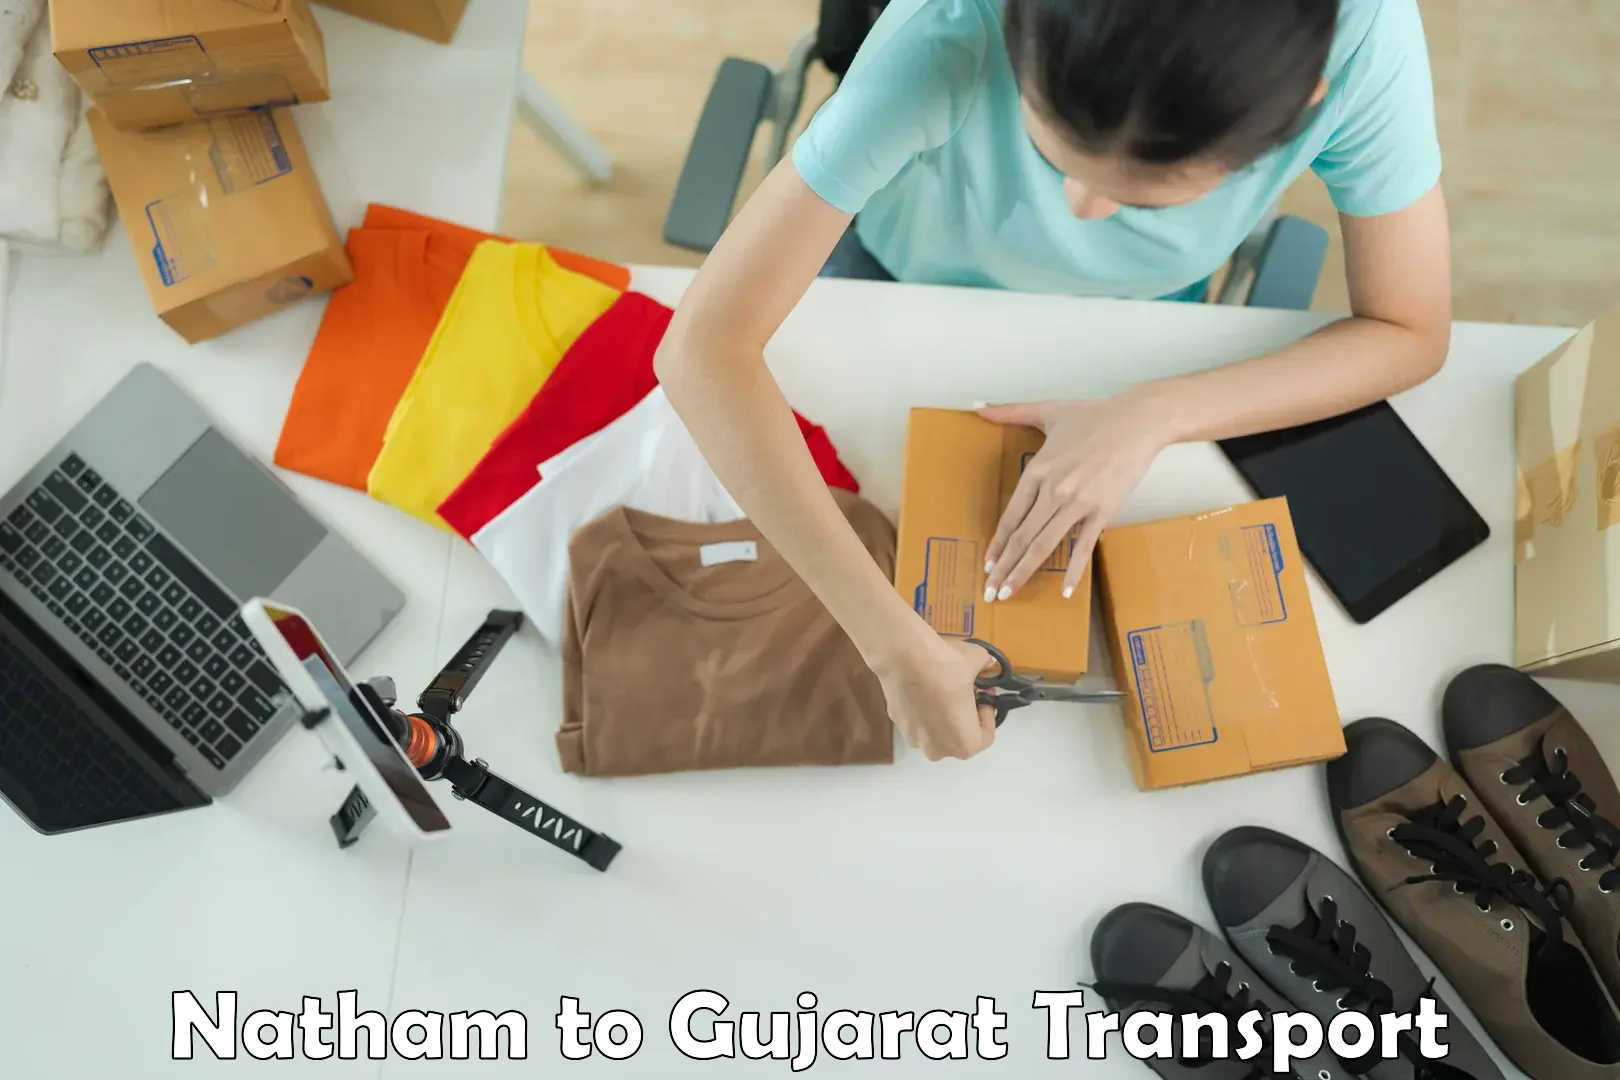 Express transport services Natham to Matar